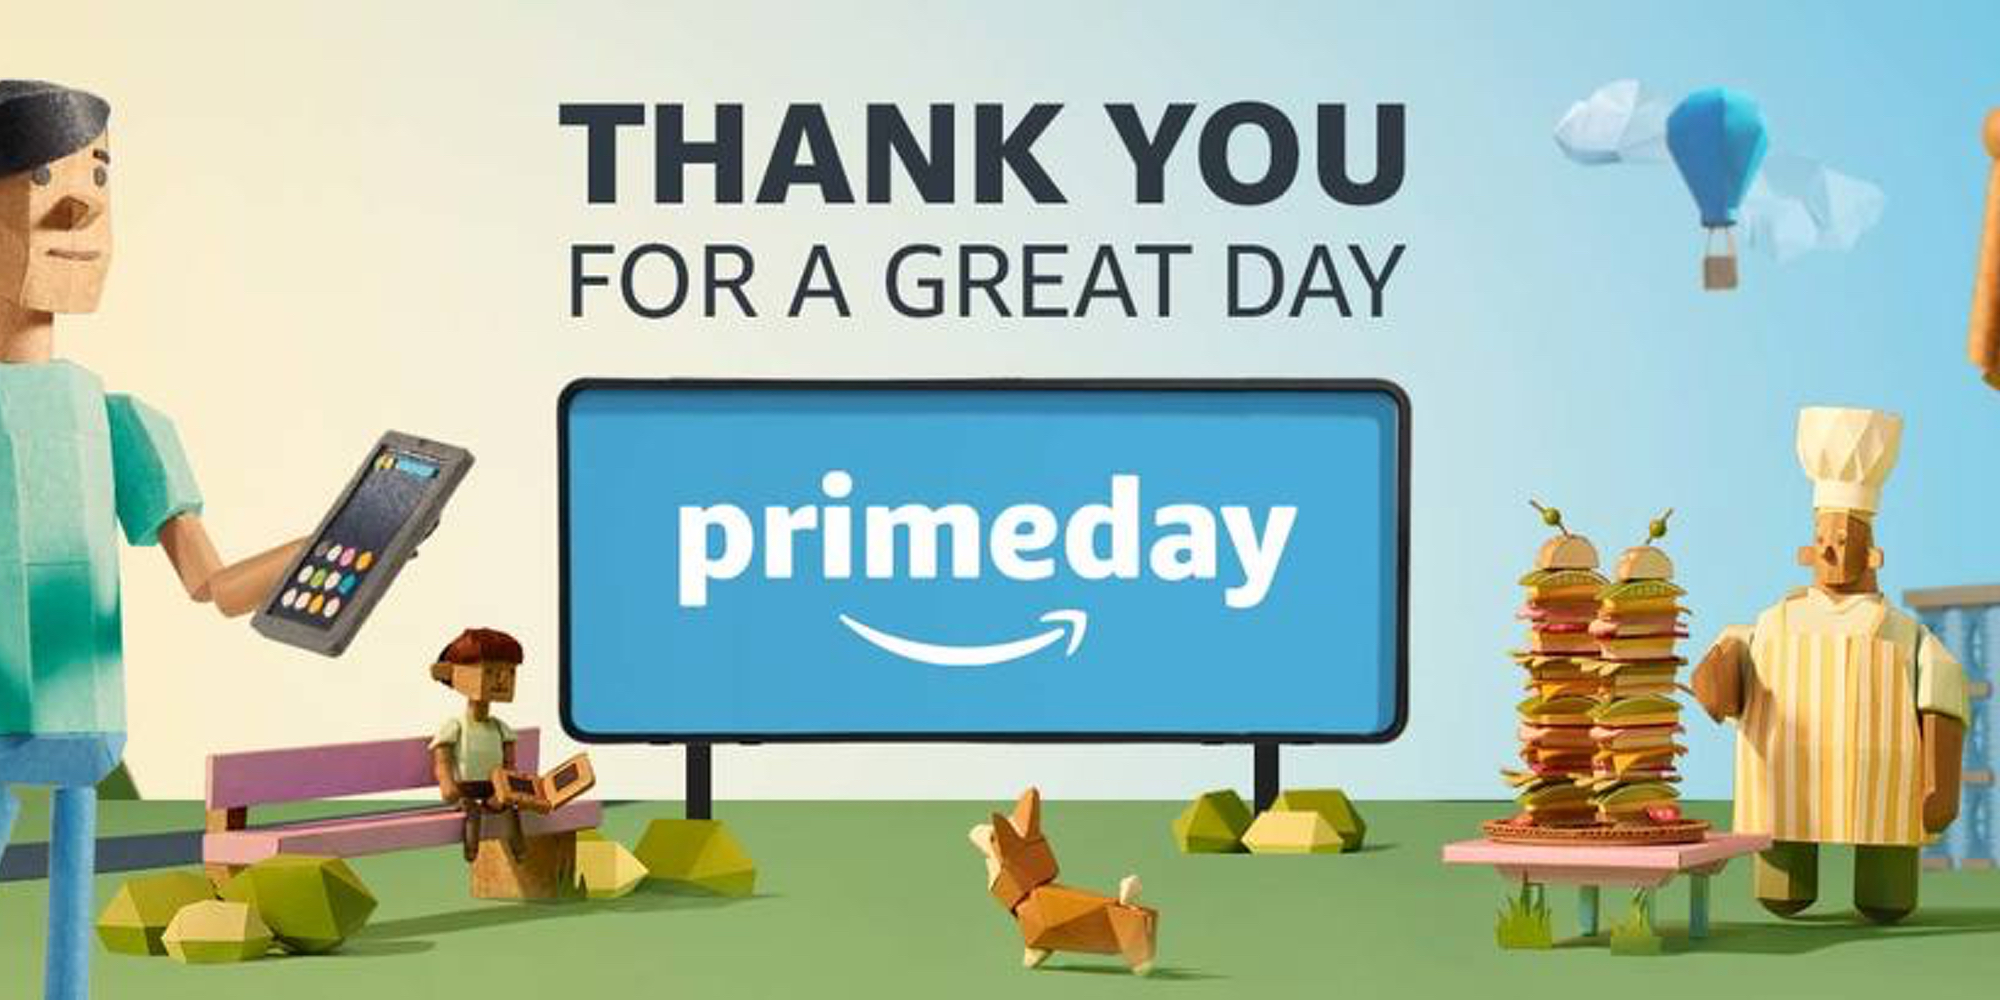 Prime Day 2017 sets record as biggest shopping event in Amazon history